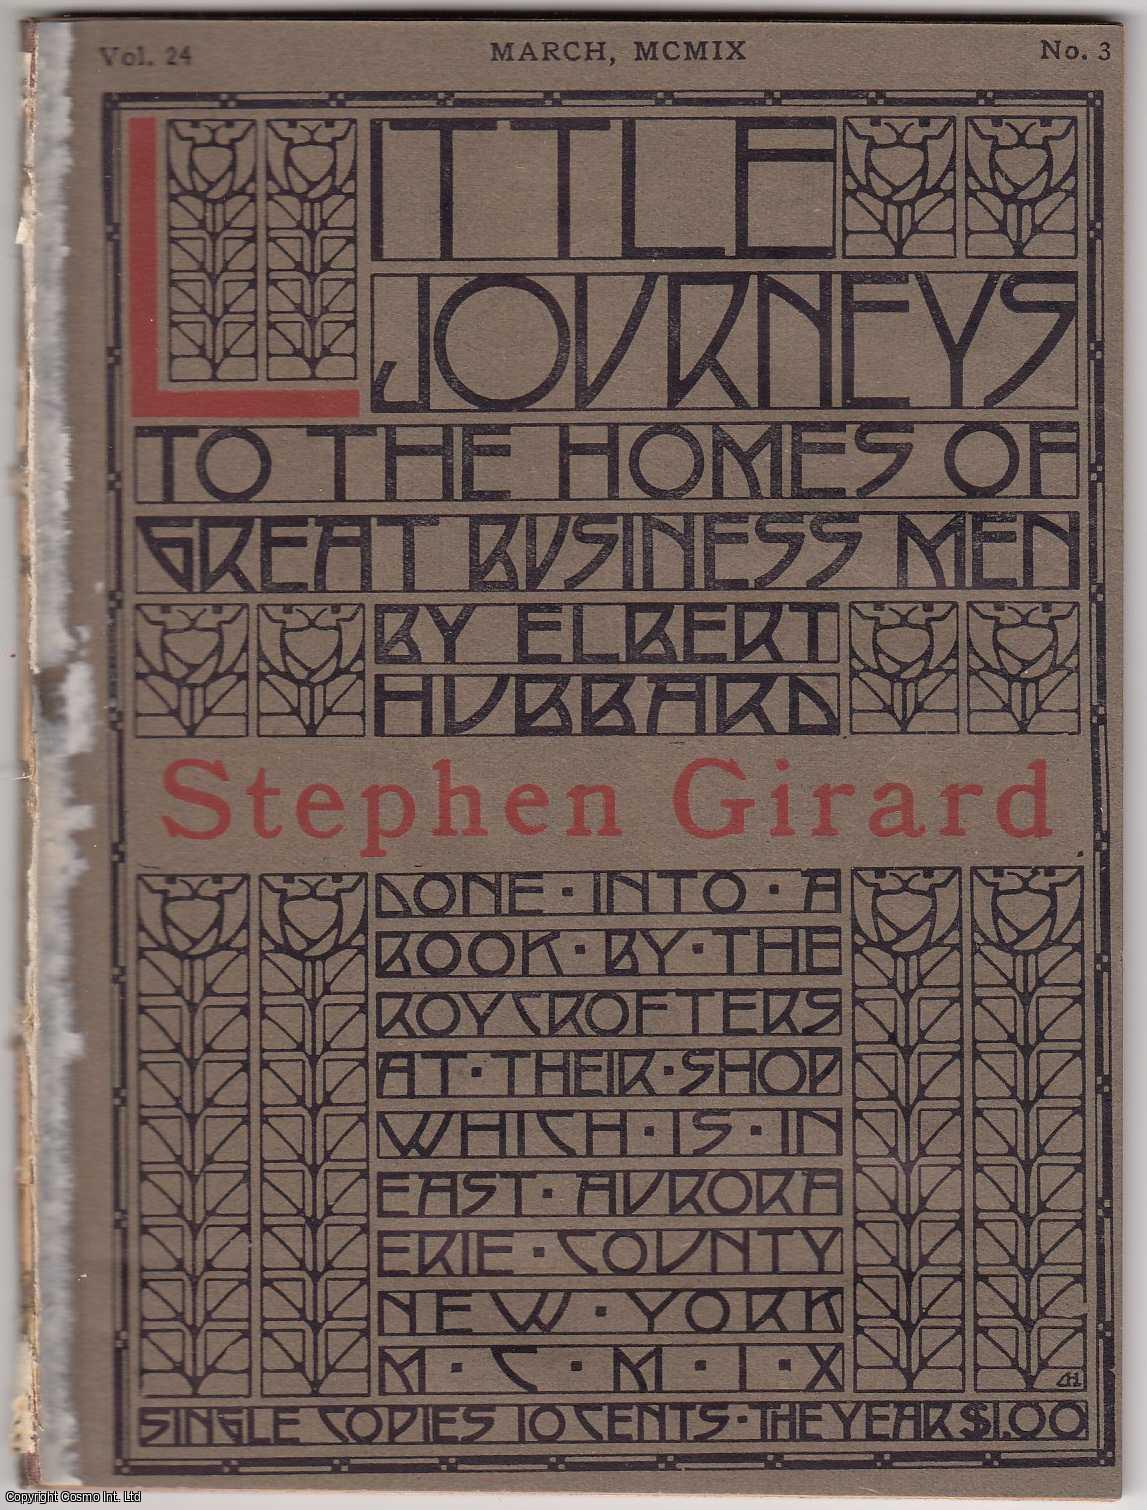 Elbert Hubbard - Stephen Girard. Little Journeys to Homes of Great Business Men. Published by The Roycrofters 1909.